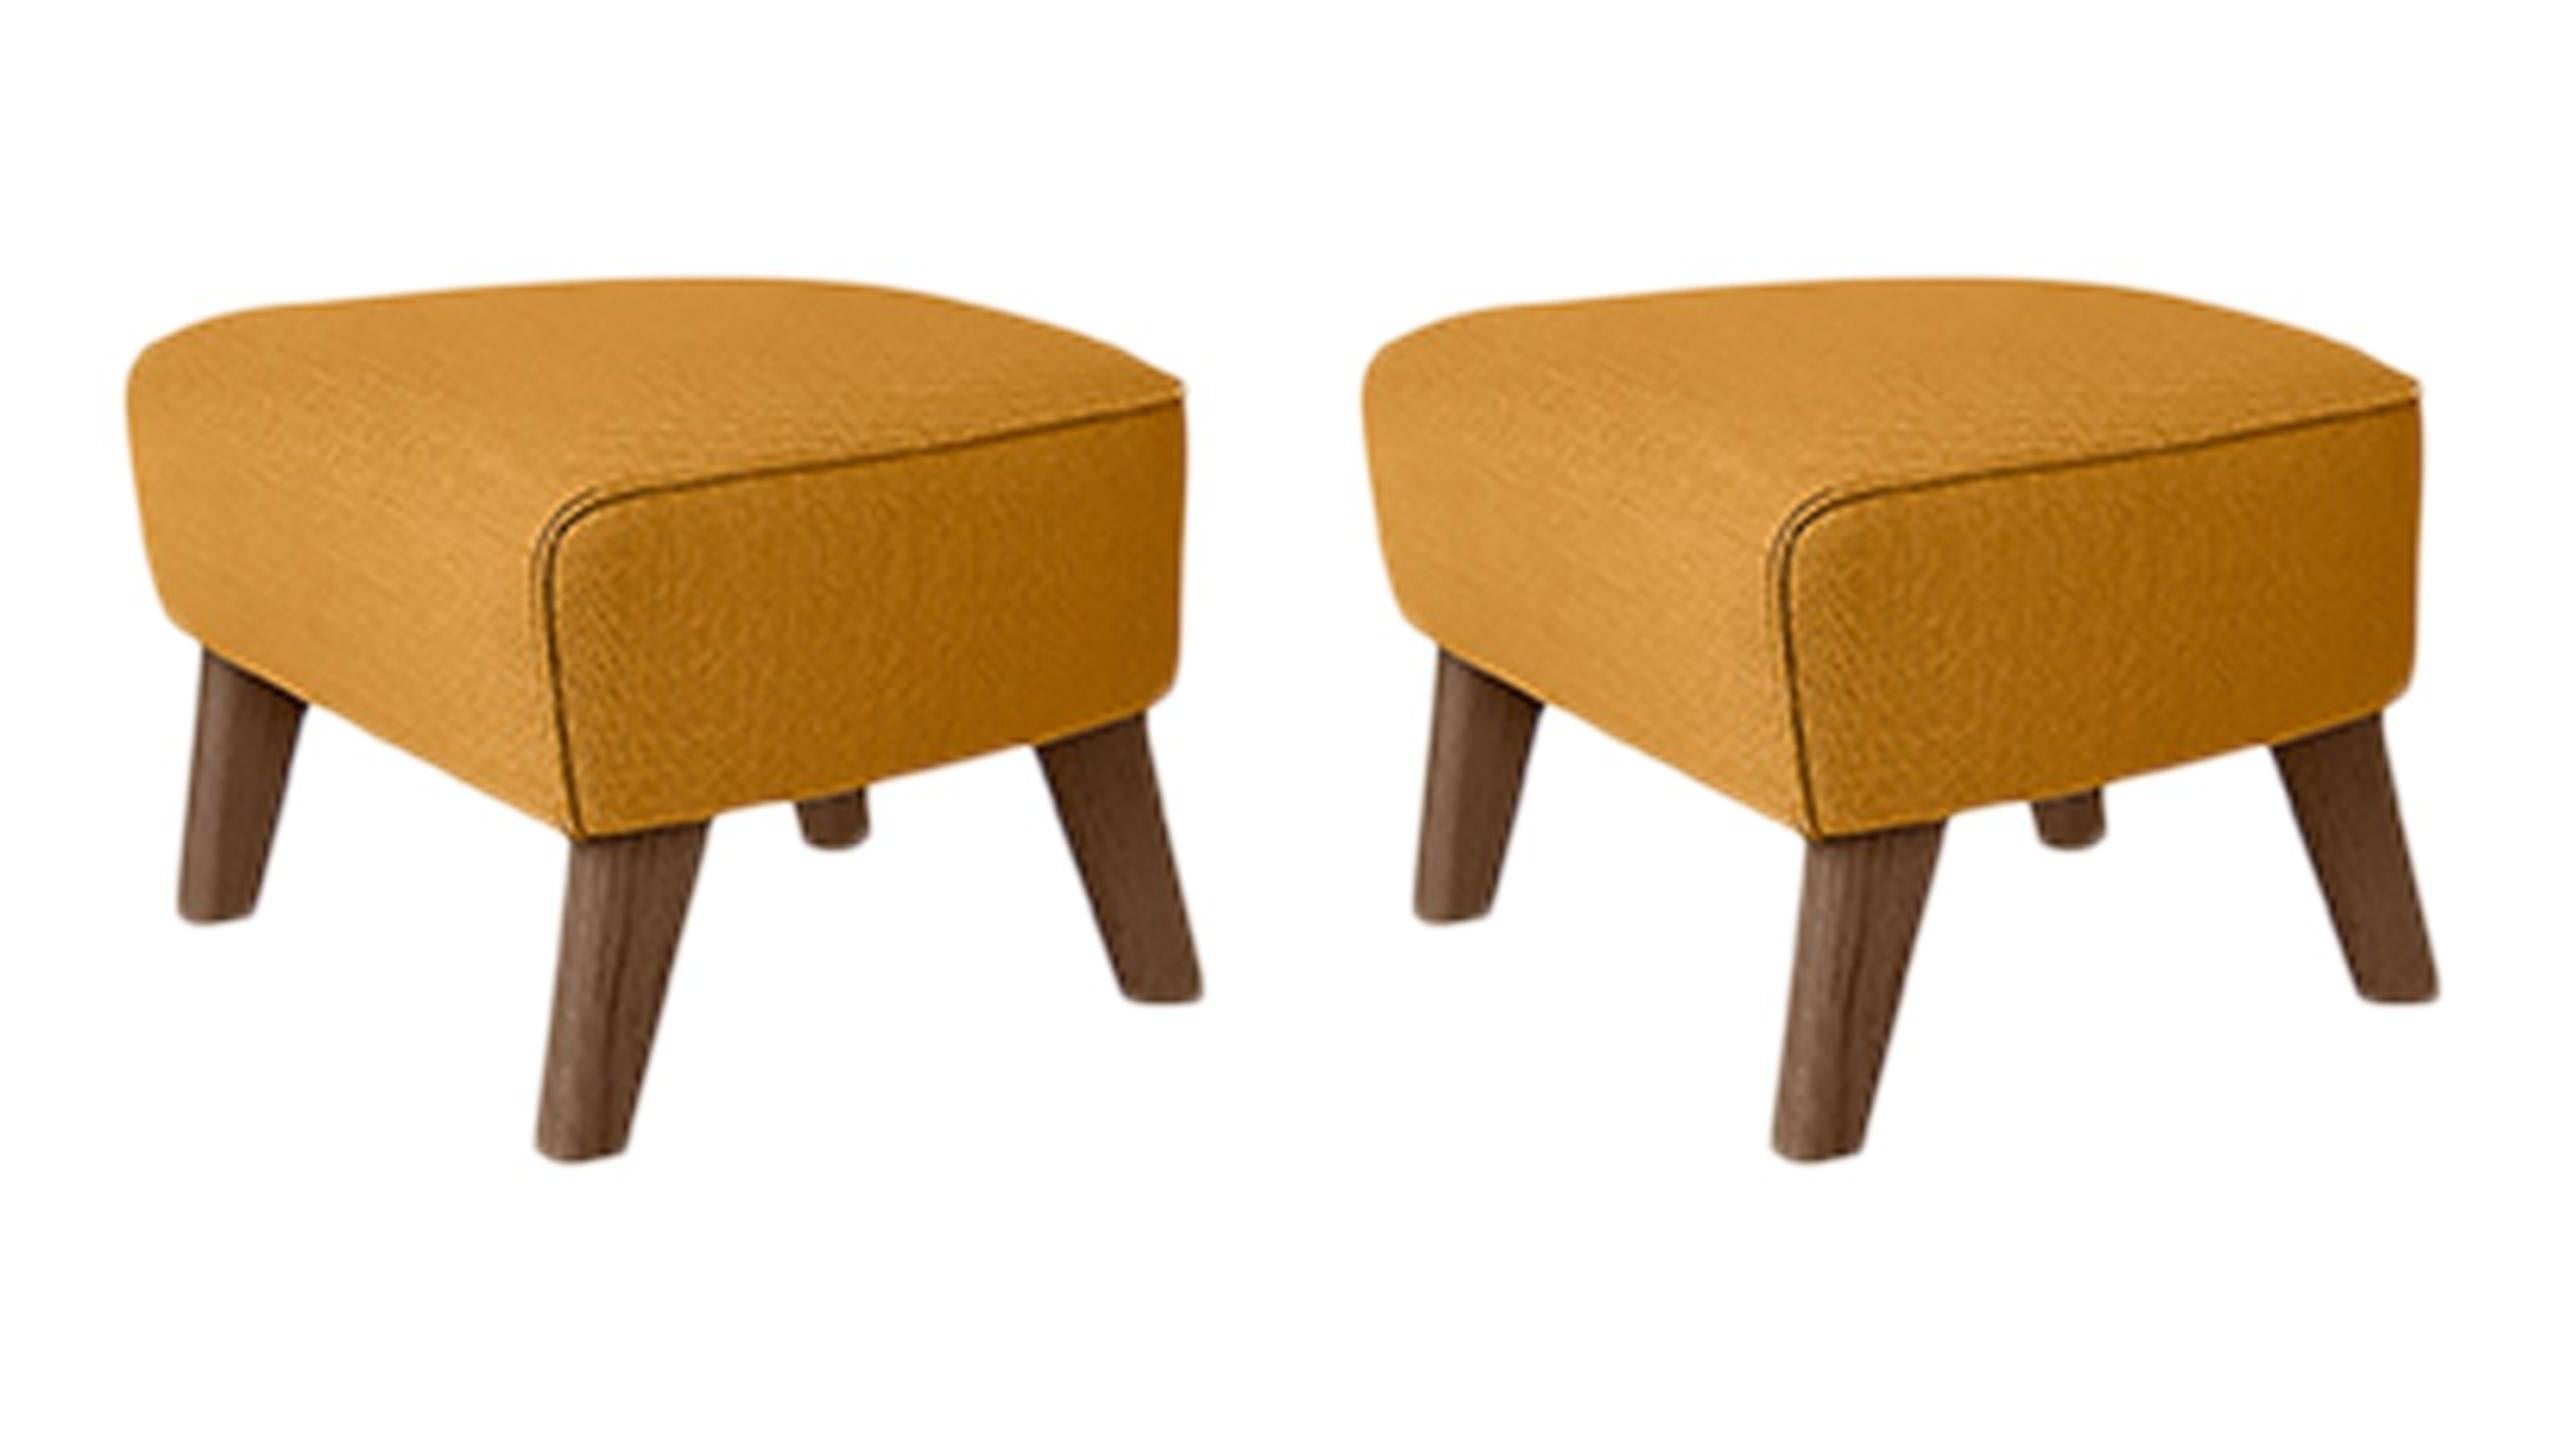 Set of 2 orange, Smoked Oak Raf Simons Vidar 3 My Own chair footstool by Lassen
Dimensions: w 56 x d 58 x h 40 cm 
Materials: Textile
Also Available: Other colors available.

The My Own Chair footstool has been designed in the same spirit as